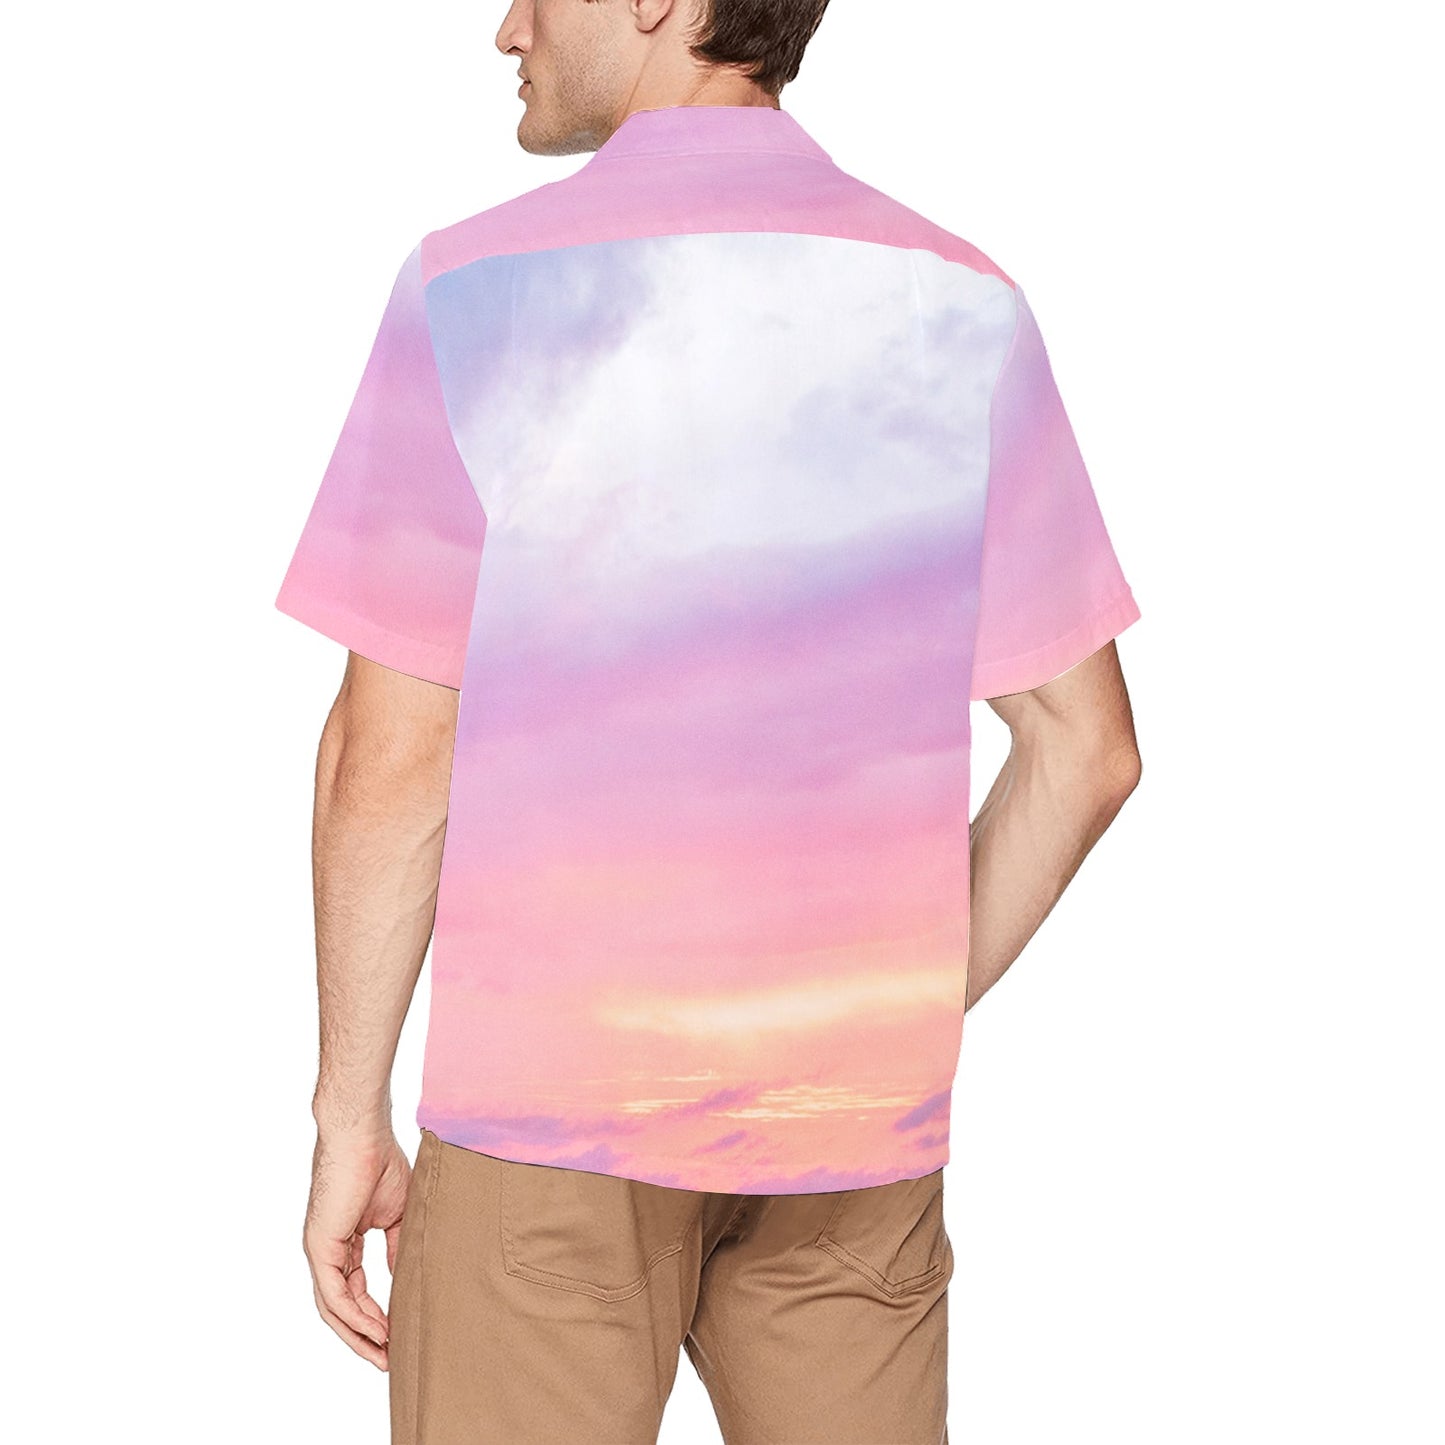 Flamingo Love Men's Shirt with Pocket up to 5XL